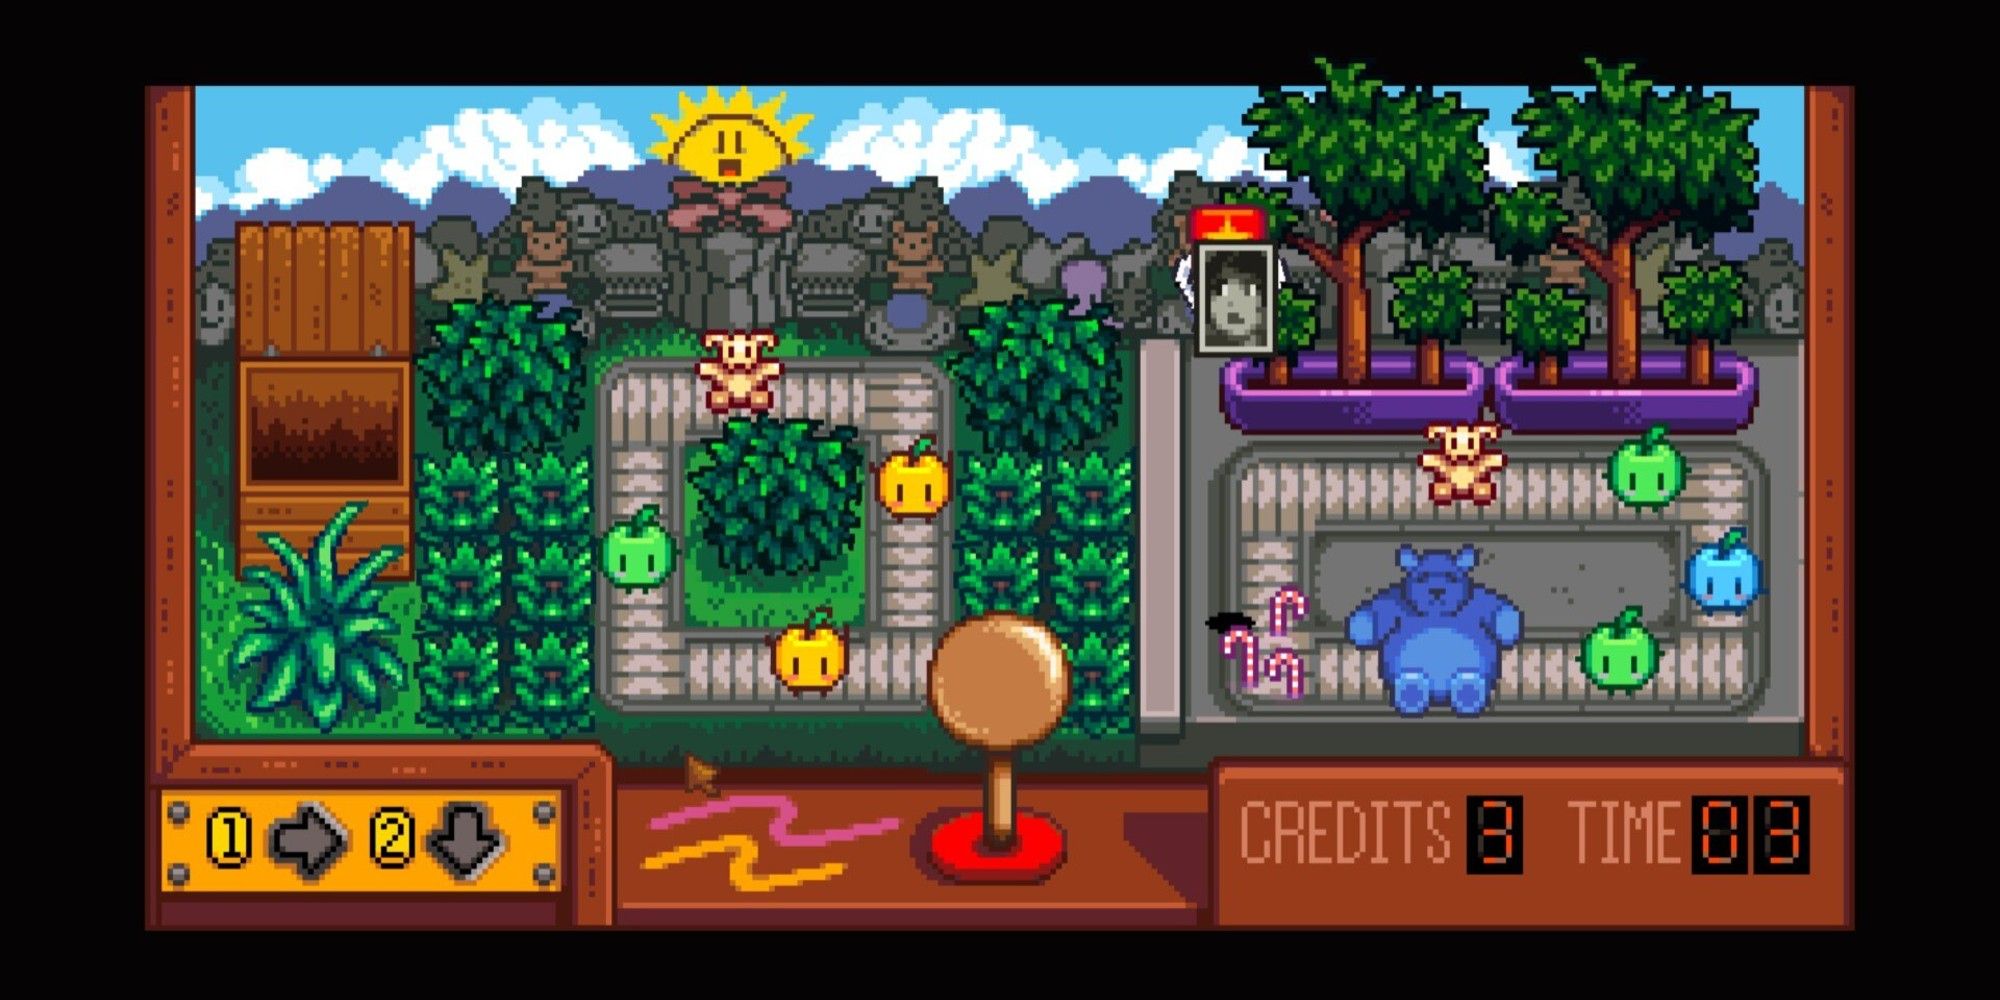 crane game in stardew valley with prizes